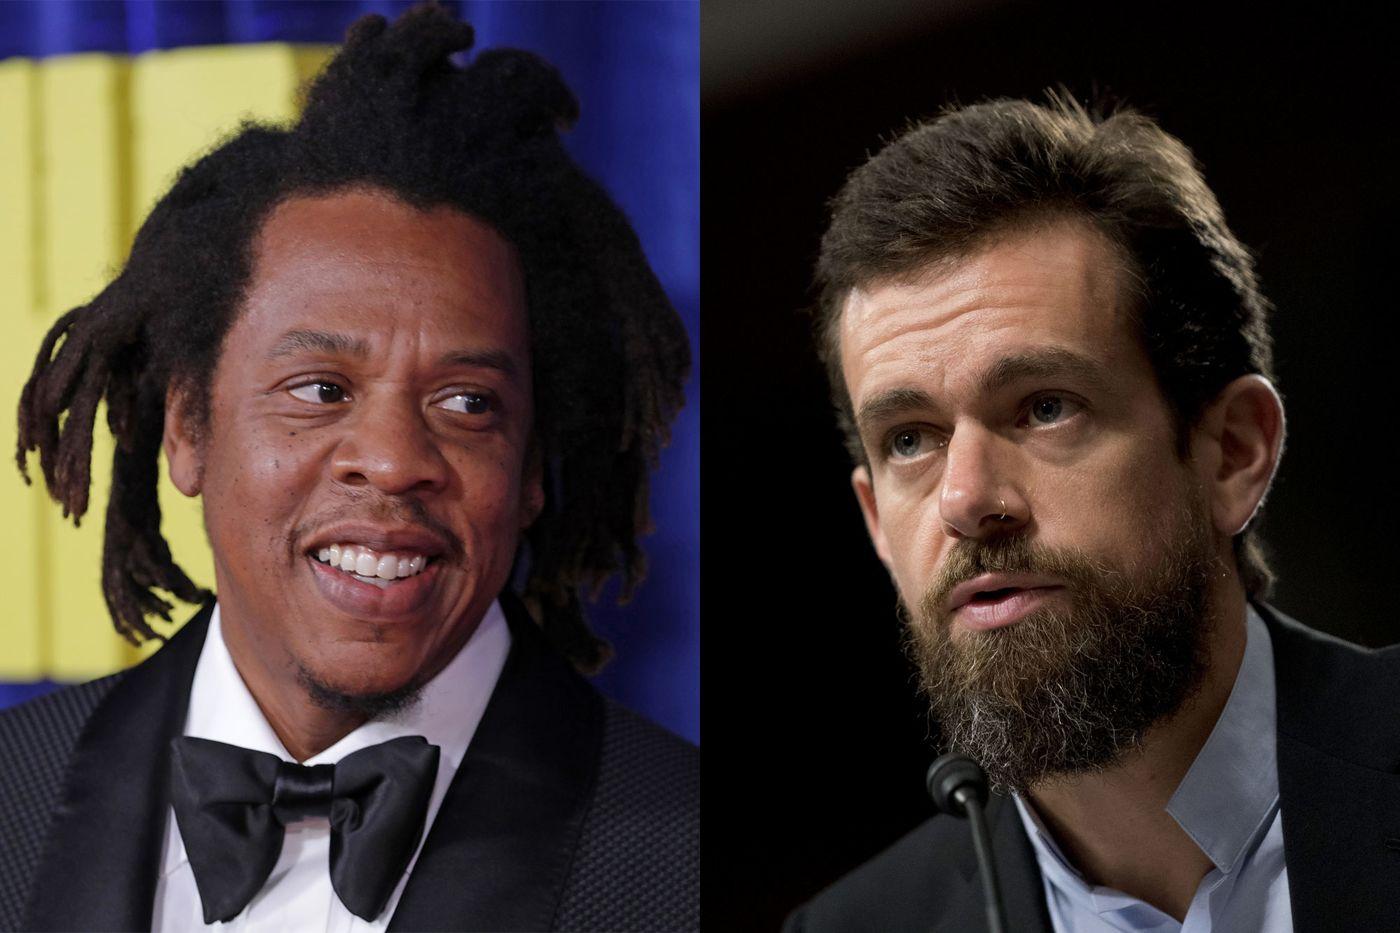 Jay Z and Jack Dorsey Building Bridge To Brooklyn Residents With Bitcoin Course